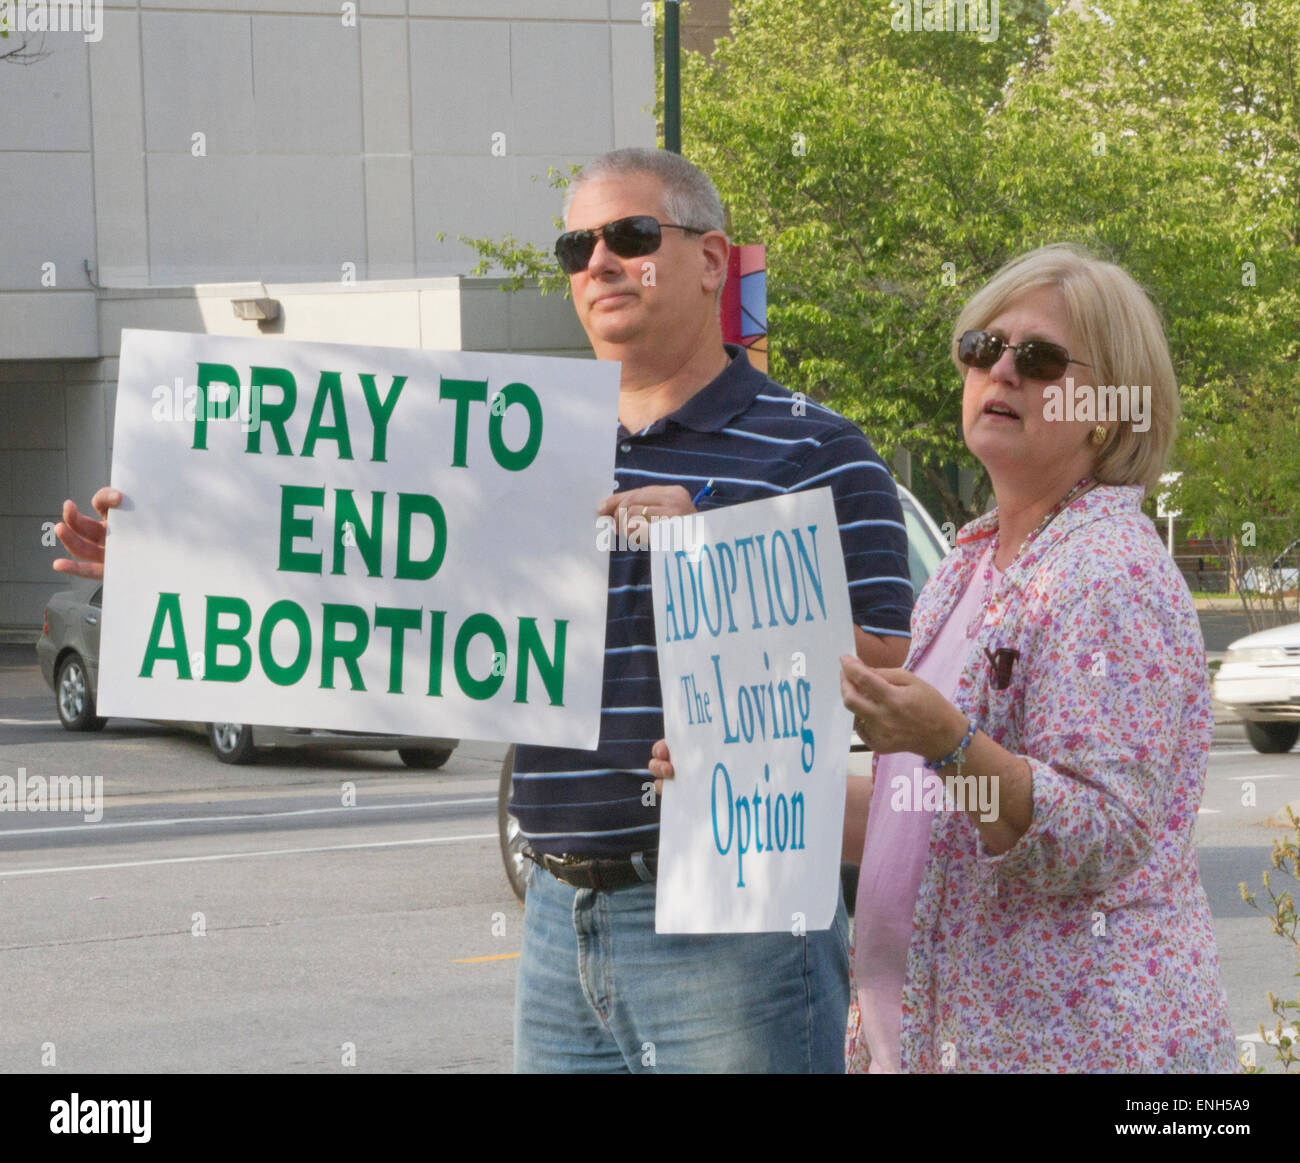 Asheville, North Carolina, USA - May 4, 2015:  An older man and woman hold anti-abortion and pro adoption signs at a rally protesting North Carolina abortion Bill #465, which requires a much longer waiting period for women seeking abortions on May 4, 2015 in downtown Asheville, NC Credit:  Judith Bicking/Alamy Live News Stock Photo